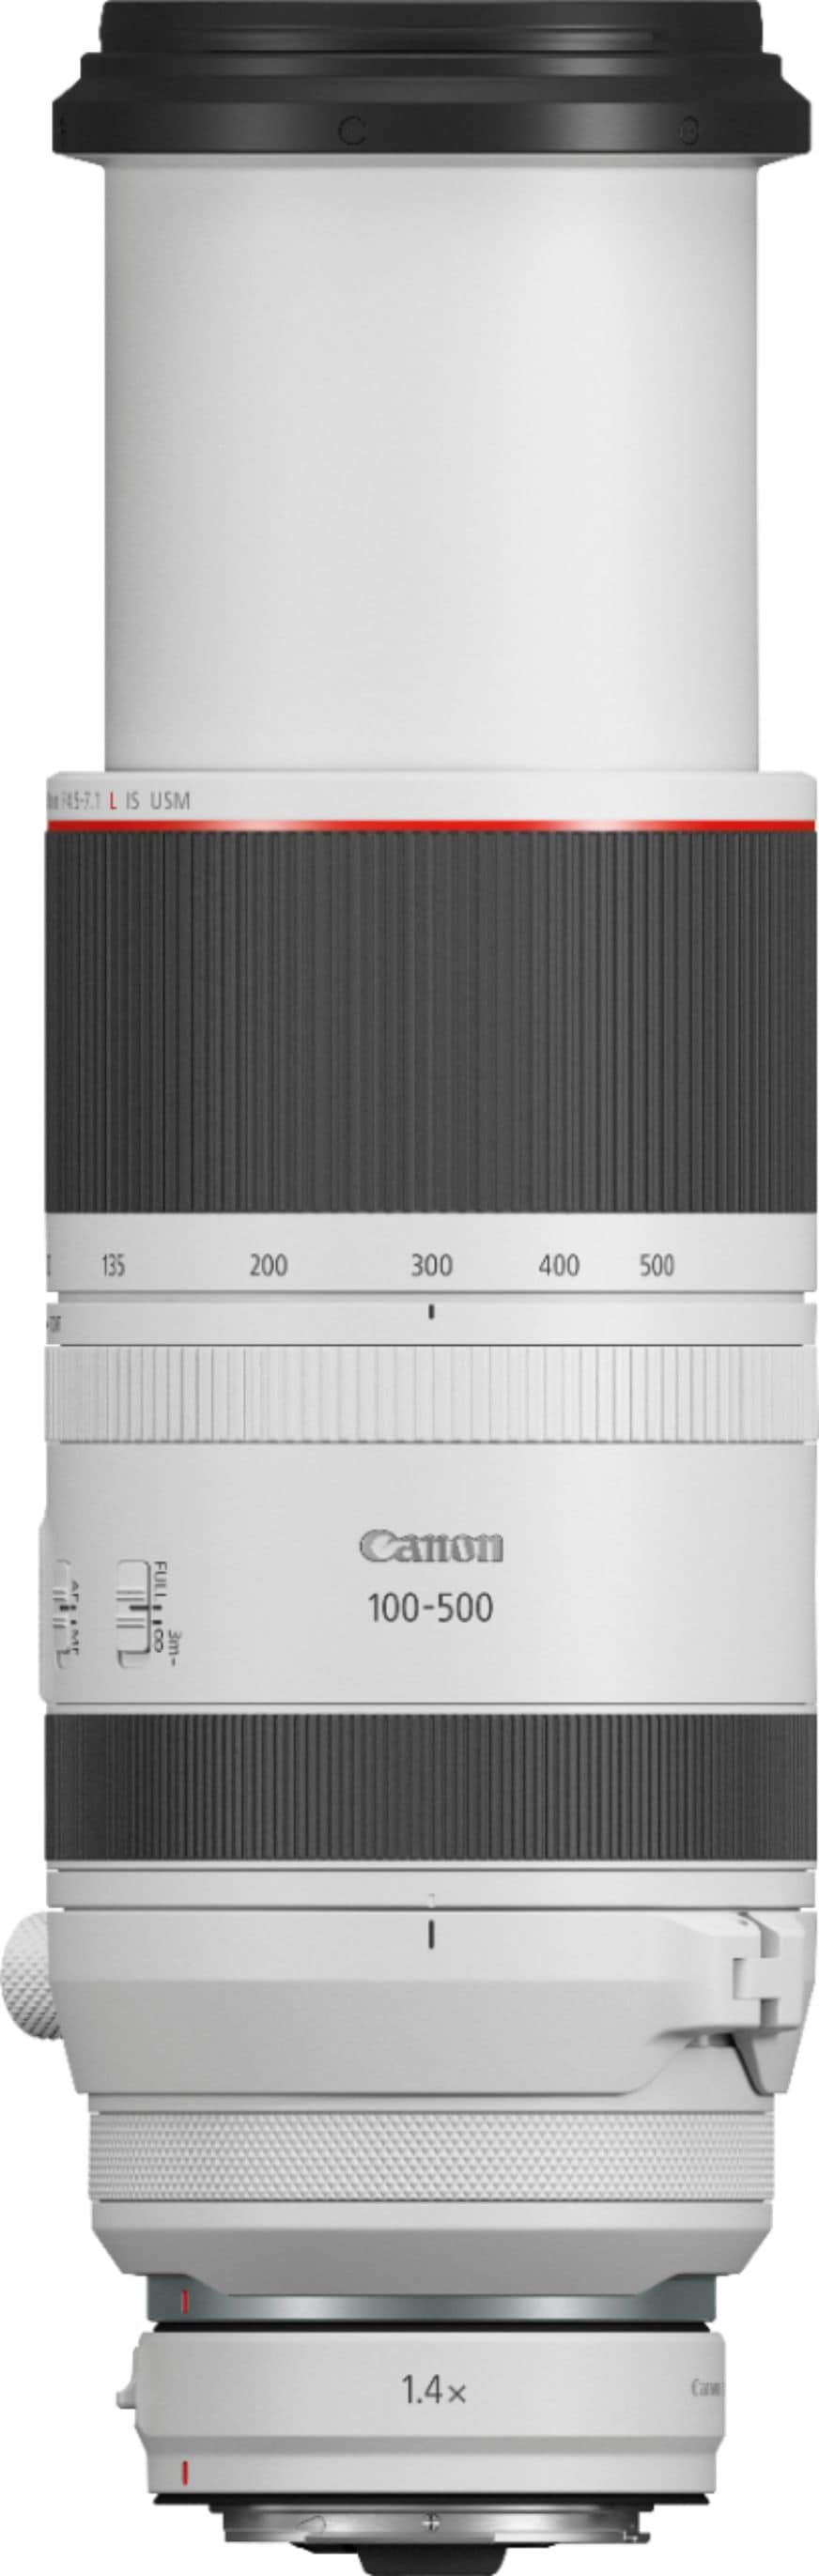 Canon - RF 100-500mm f/4.5-7.1 L IS USM Telephoto Zoom Lens - White_2